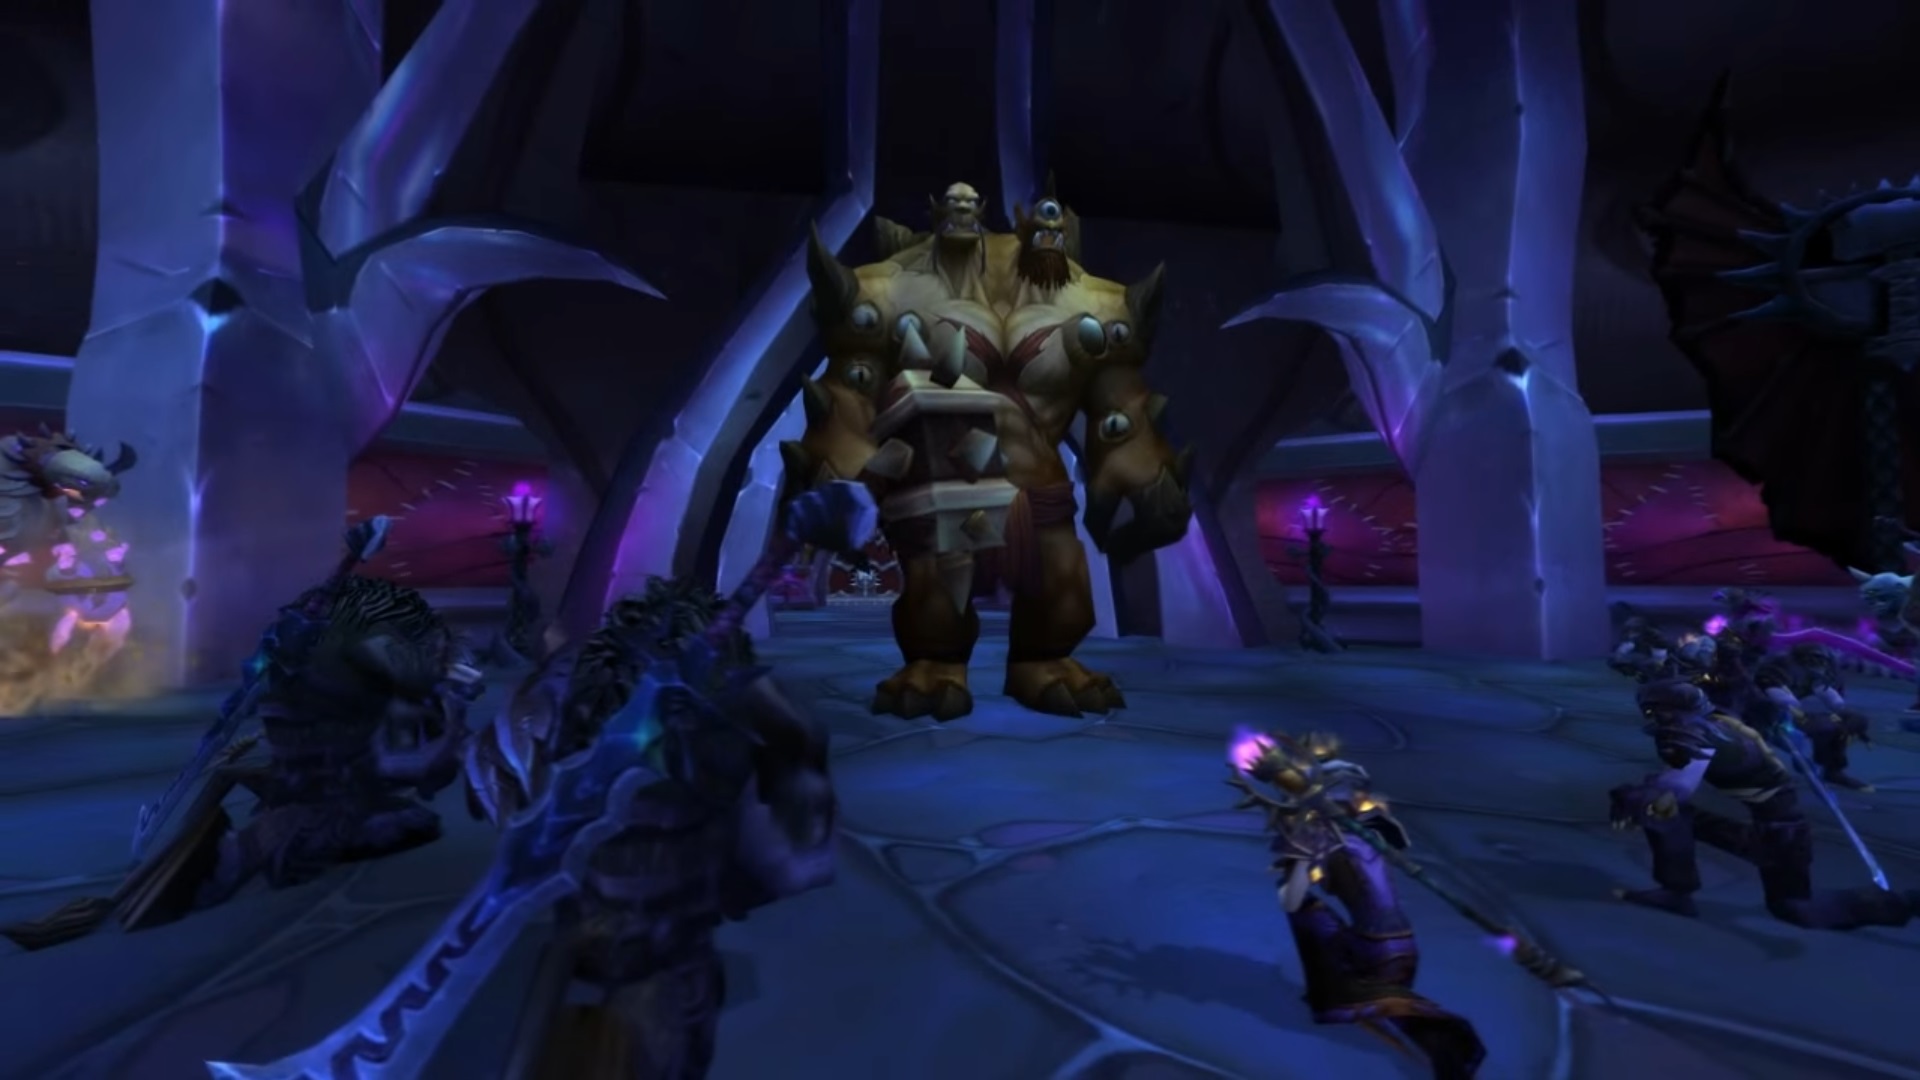 Bastion of Twilight - Wowpedia - Your wiki guide to the World of Warcraft